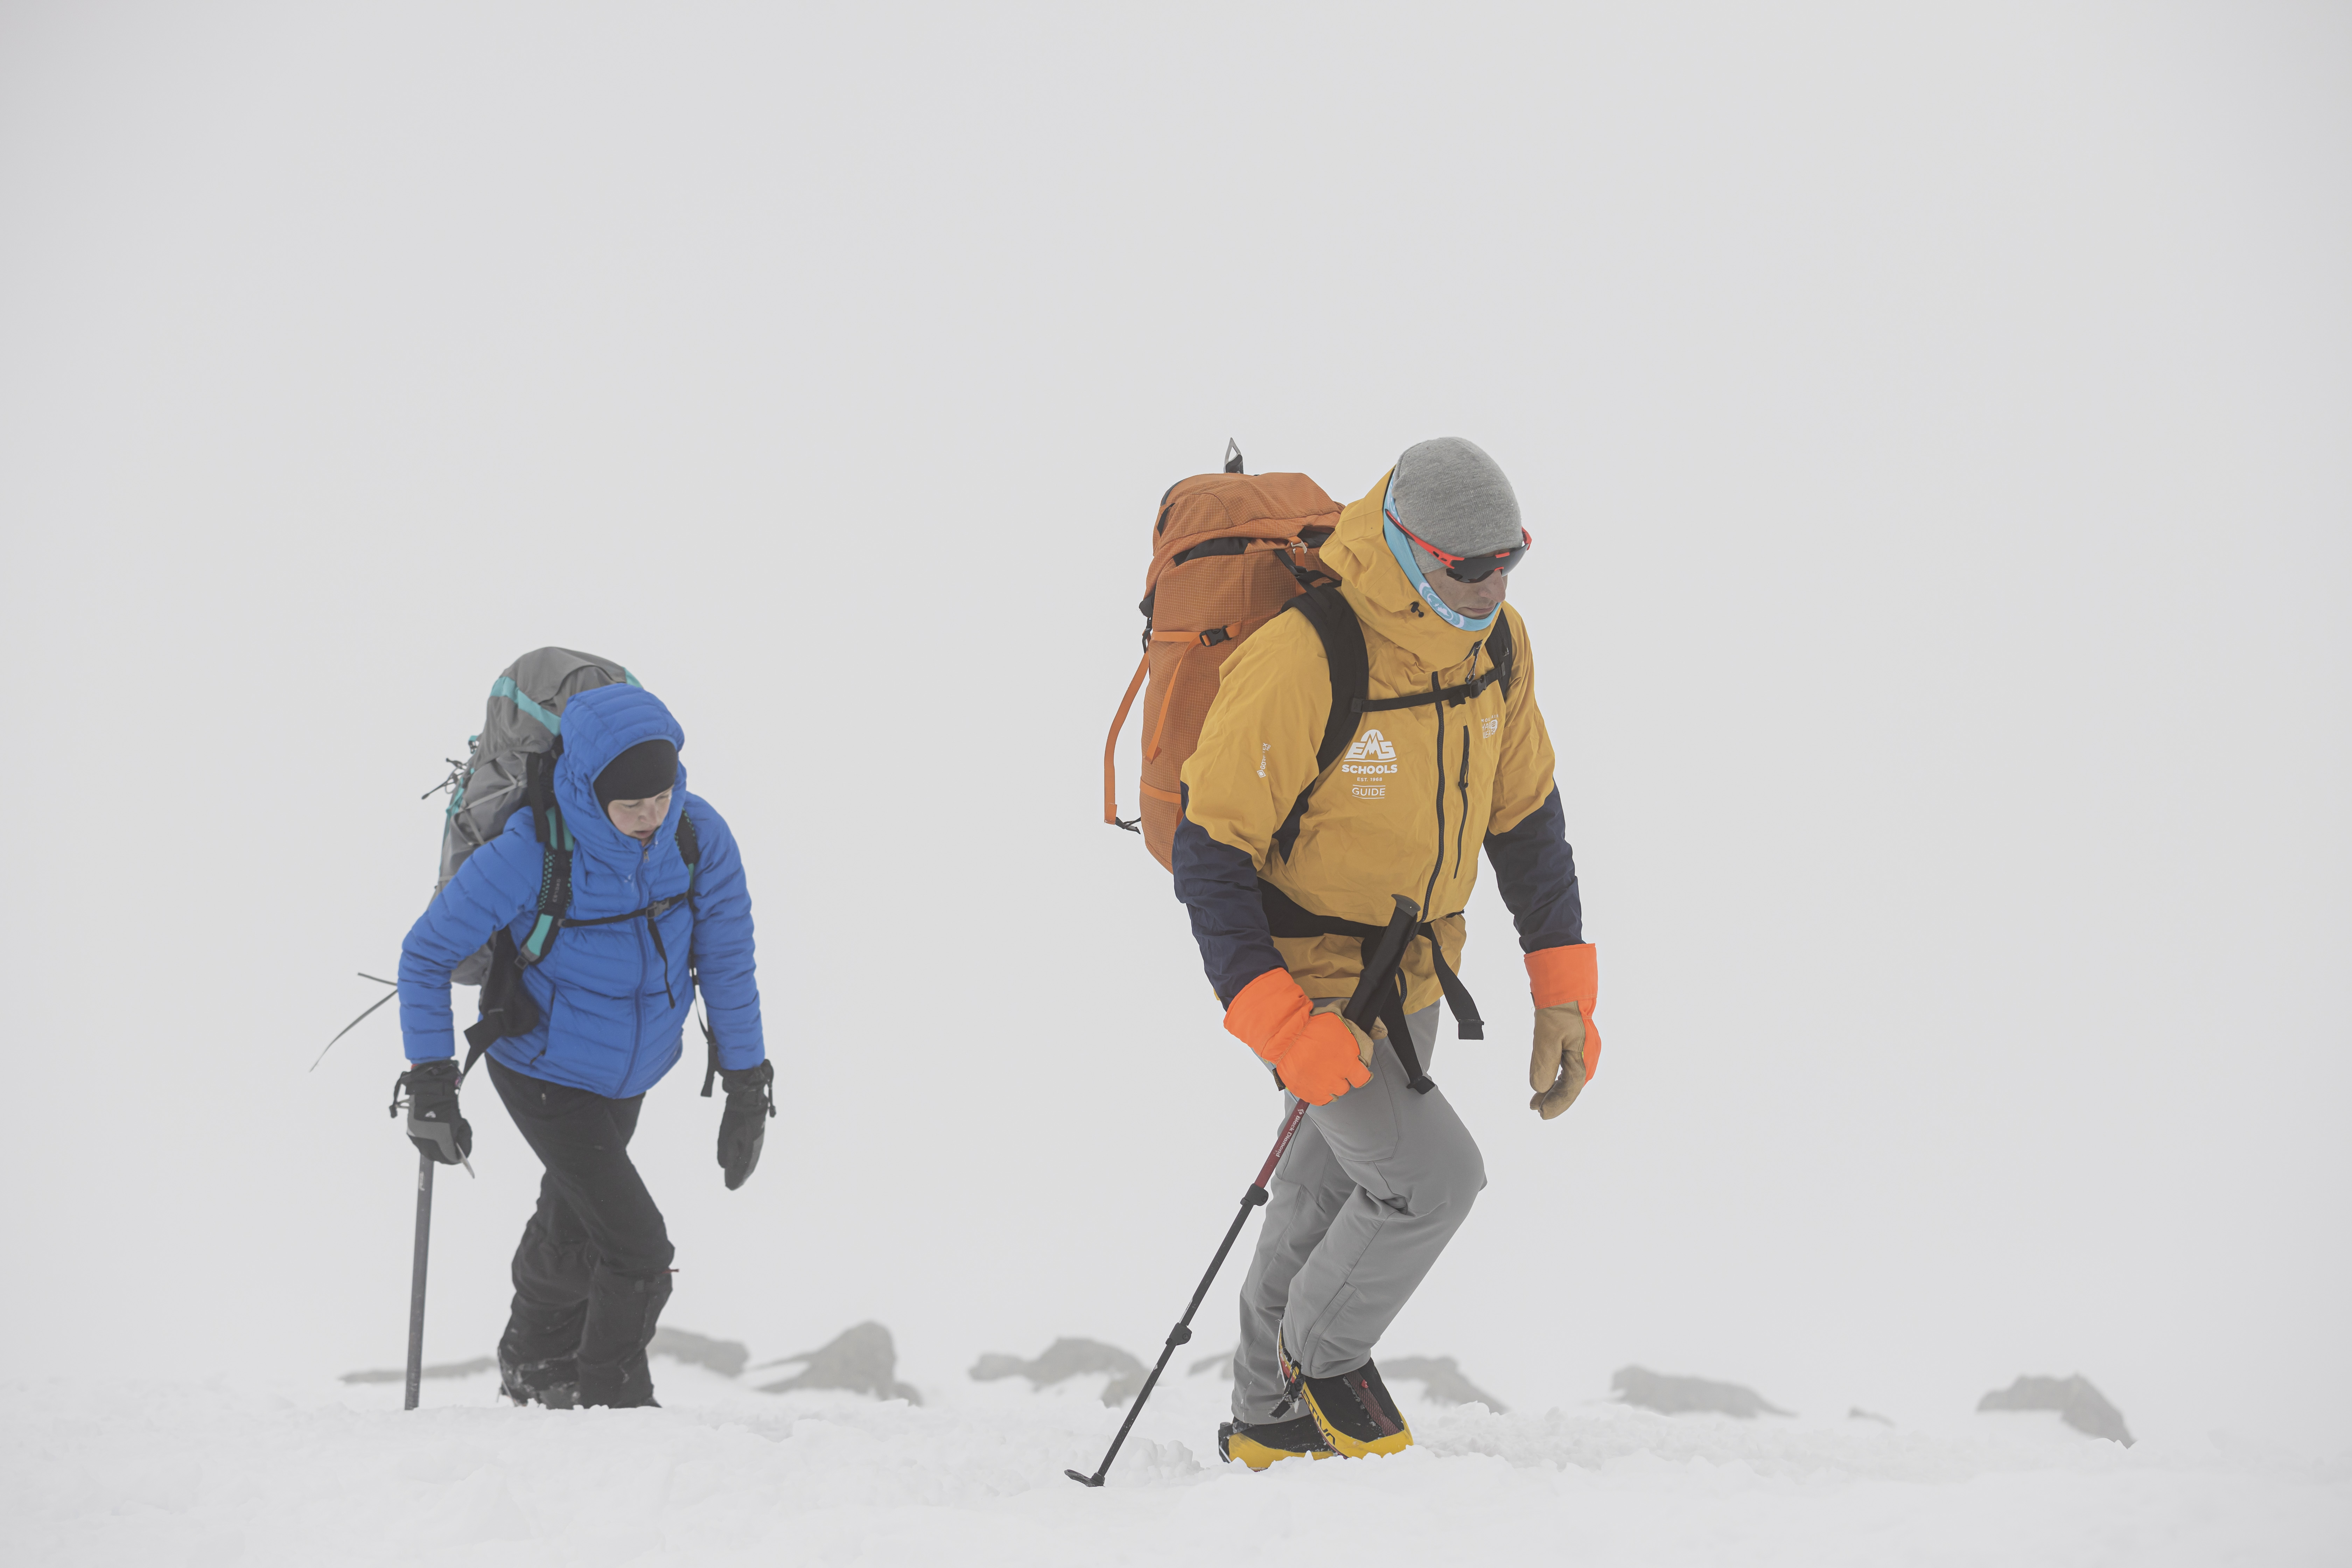 Putting all the gear needed to climb Mount Washington to the test